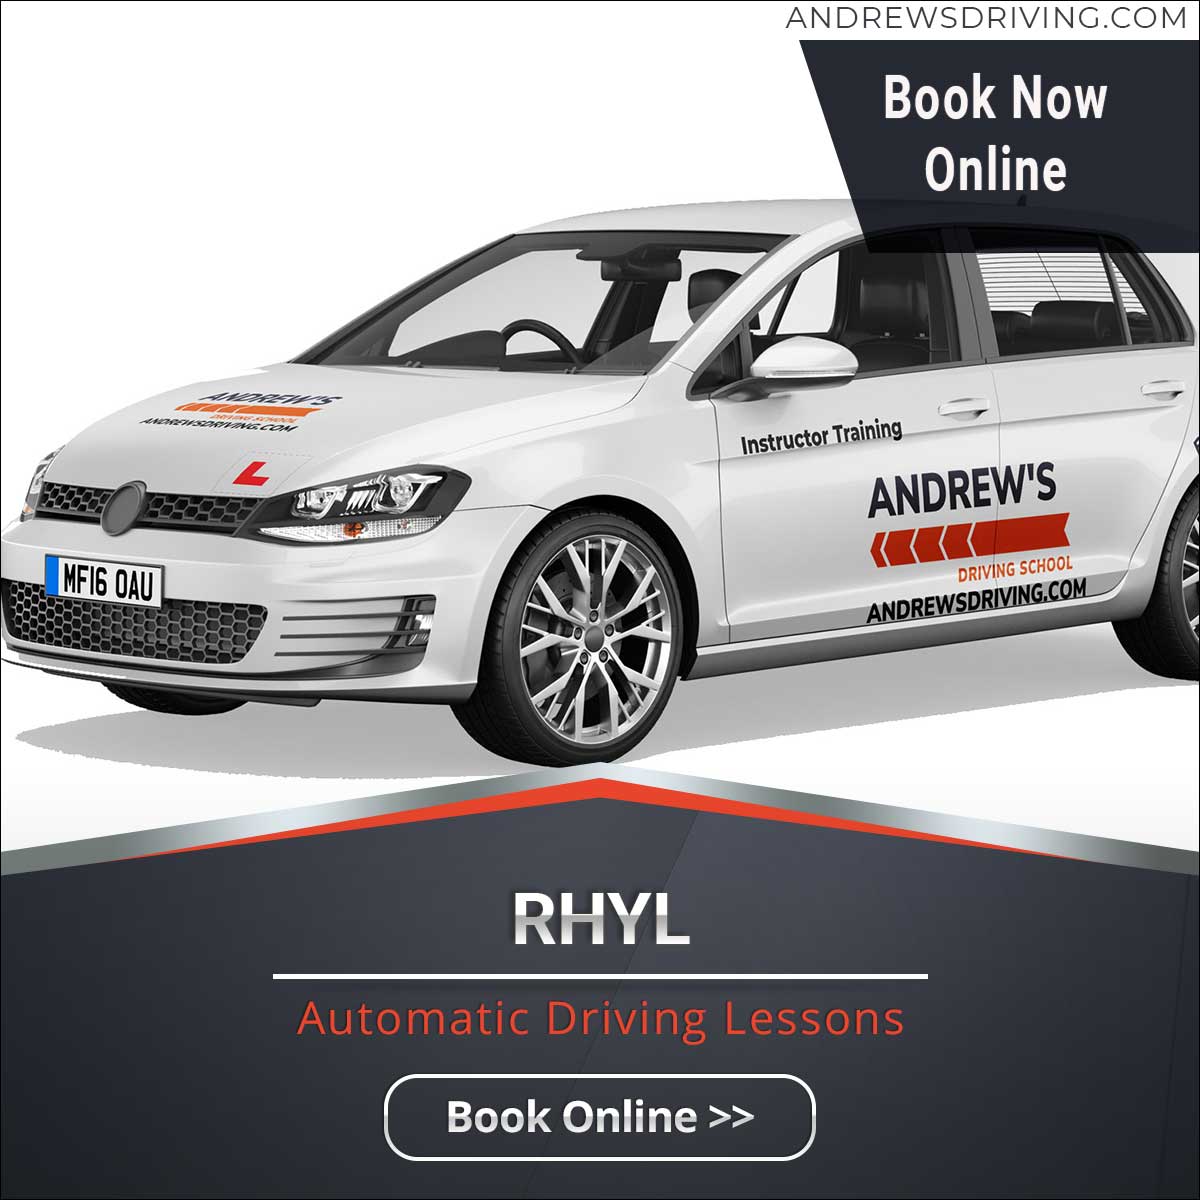 Rhyl Automatic driving lesson banner